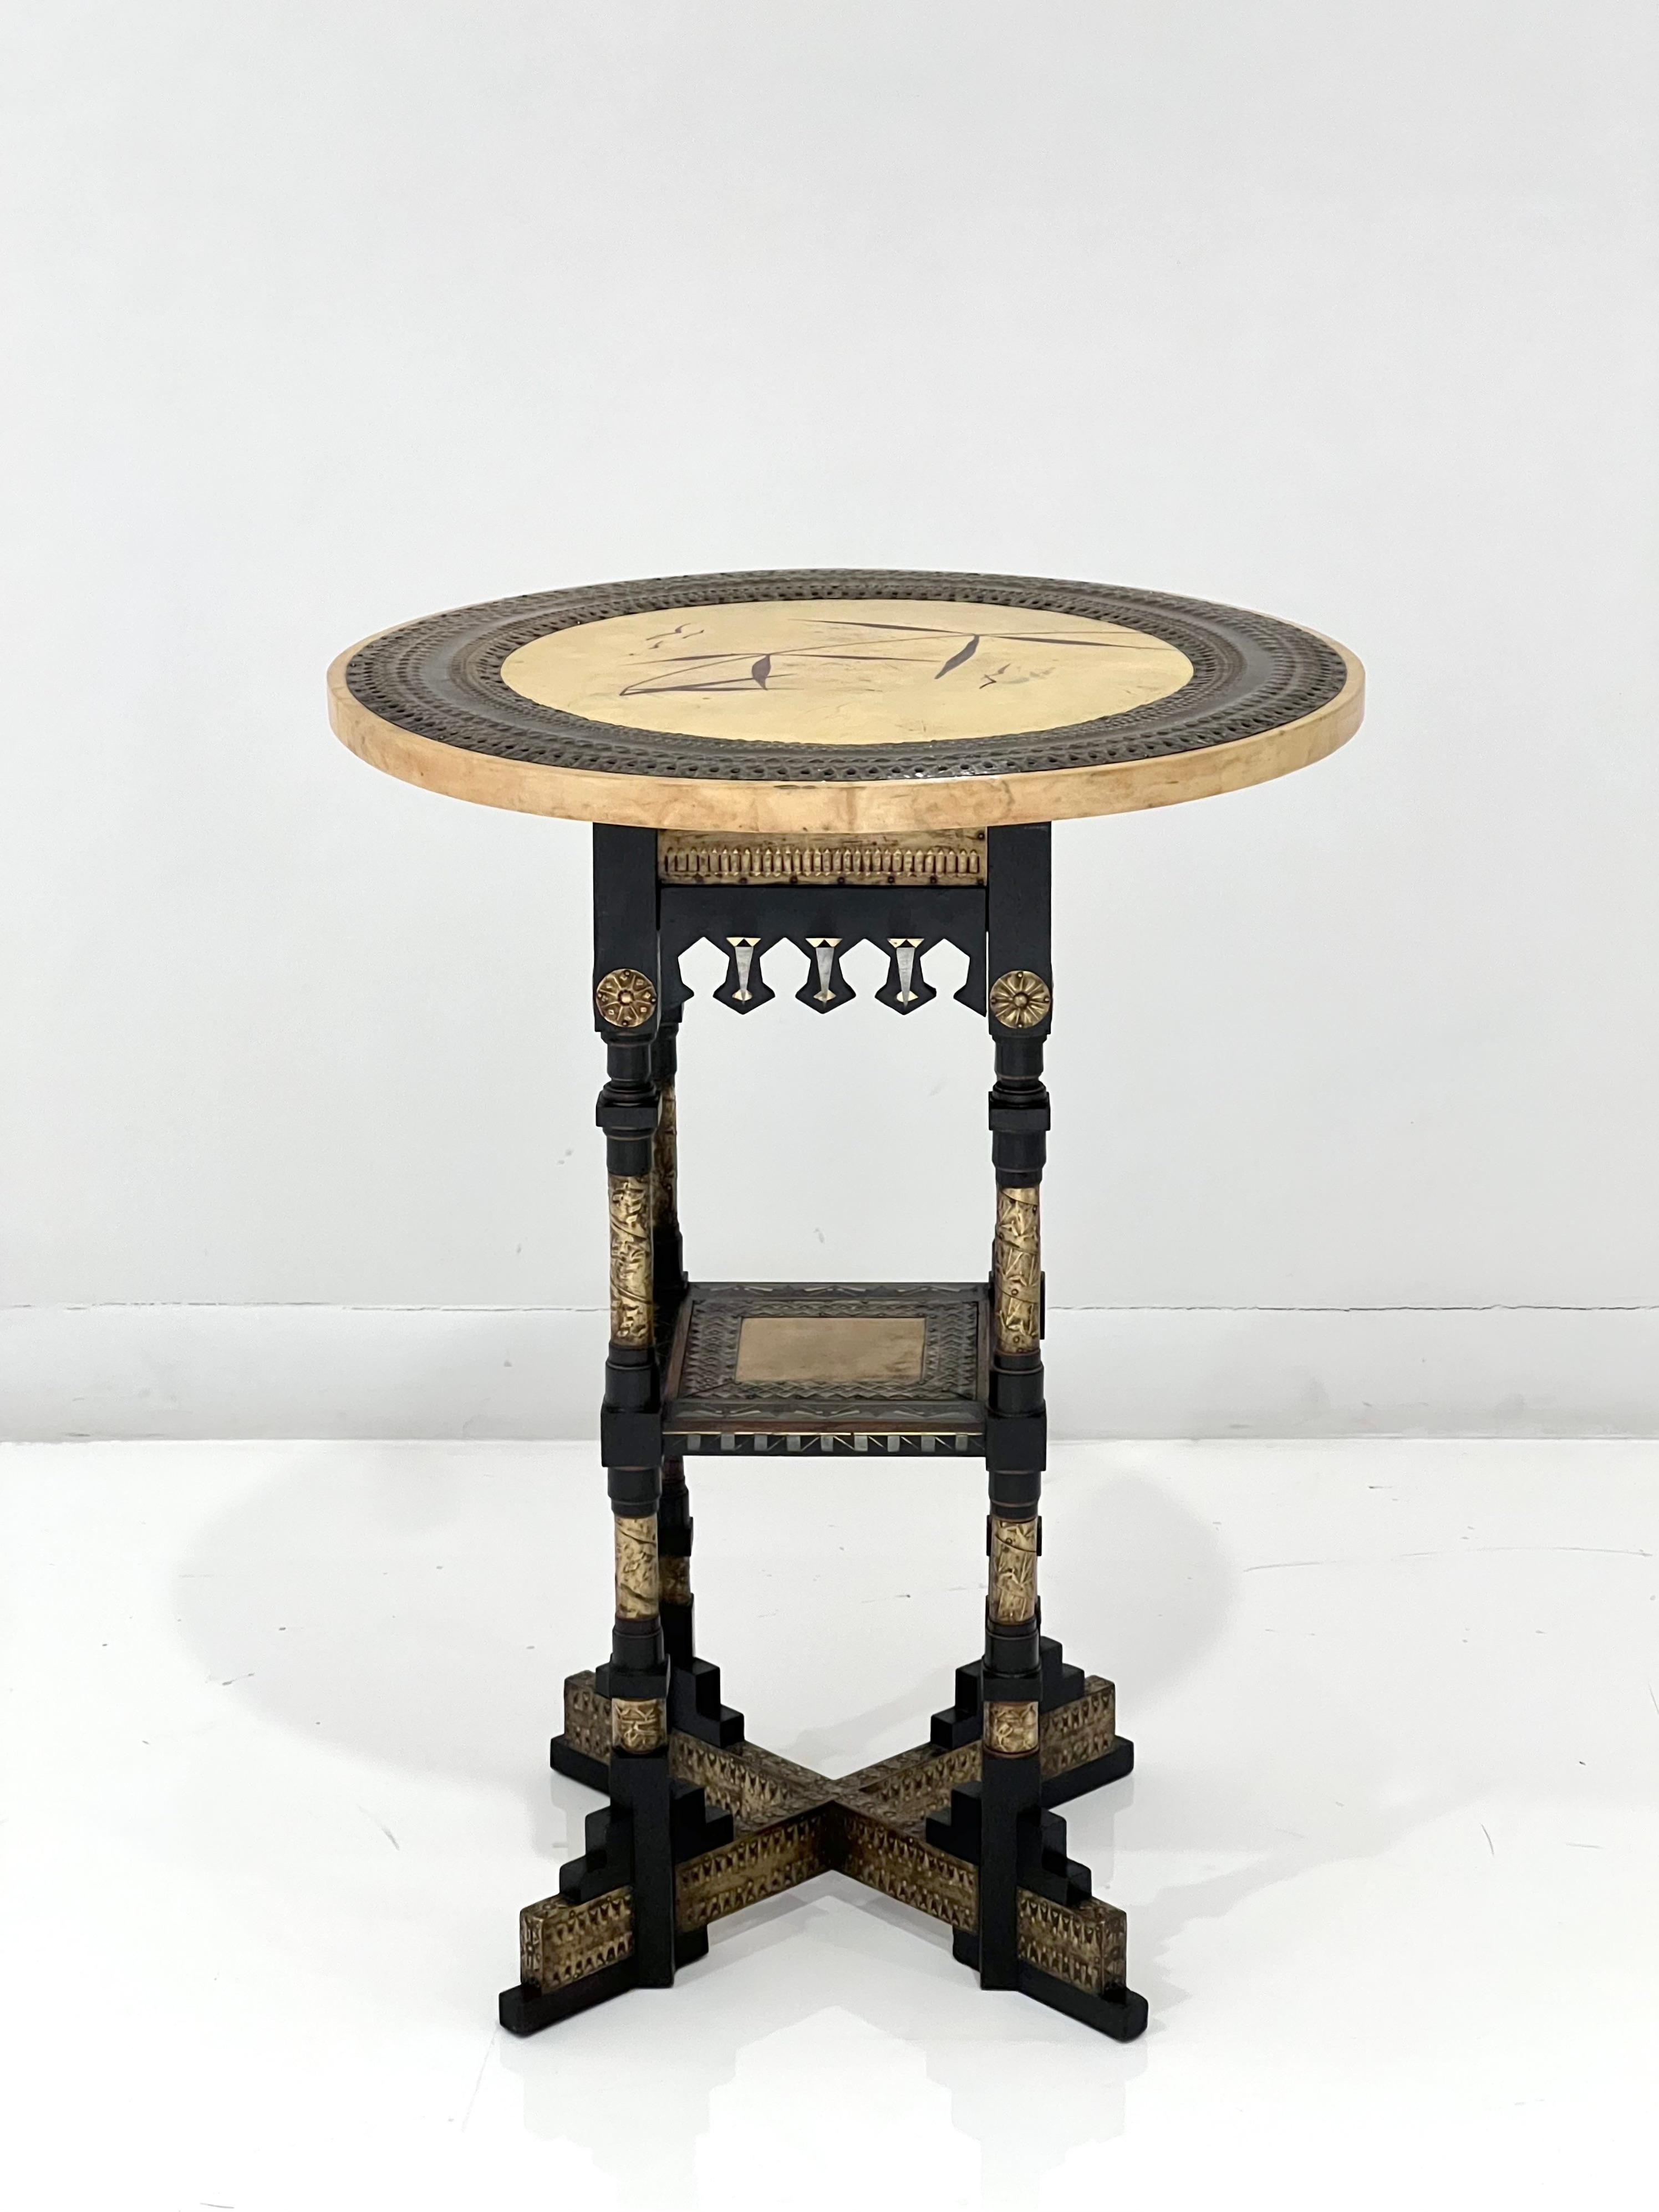 Stunning Carlo Bugatti parchment side table. Italy, circa 1890. Mahogany, ebonized woods, brass, pewter, parchment with birds and foliage motifs.